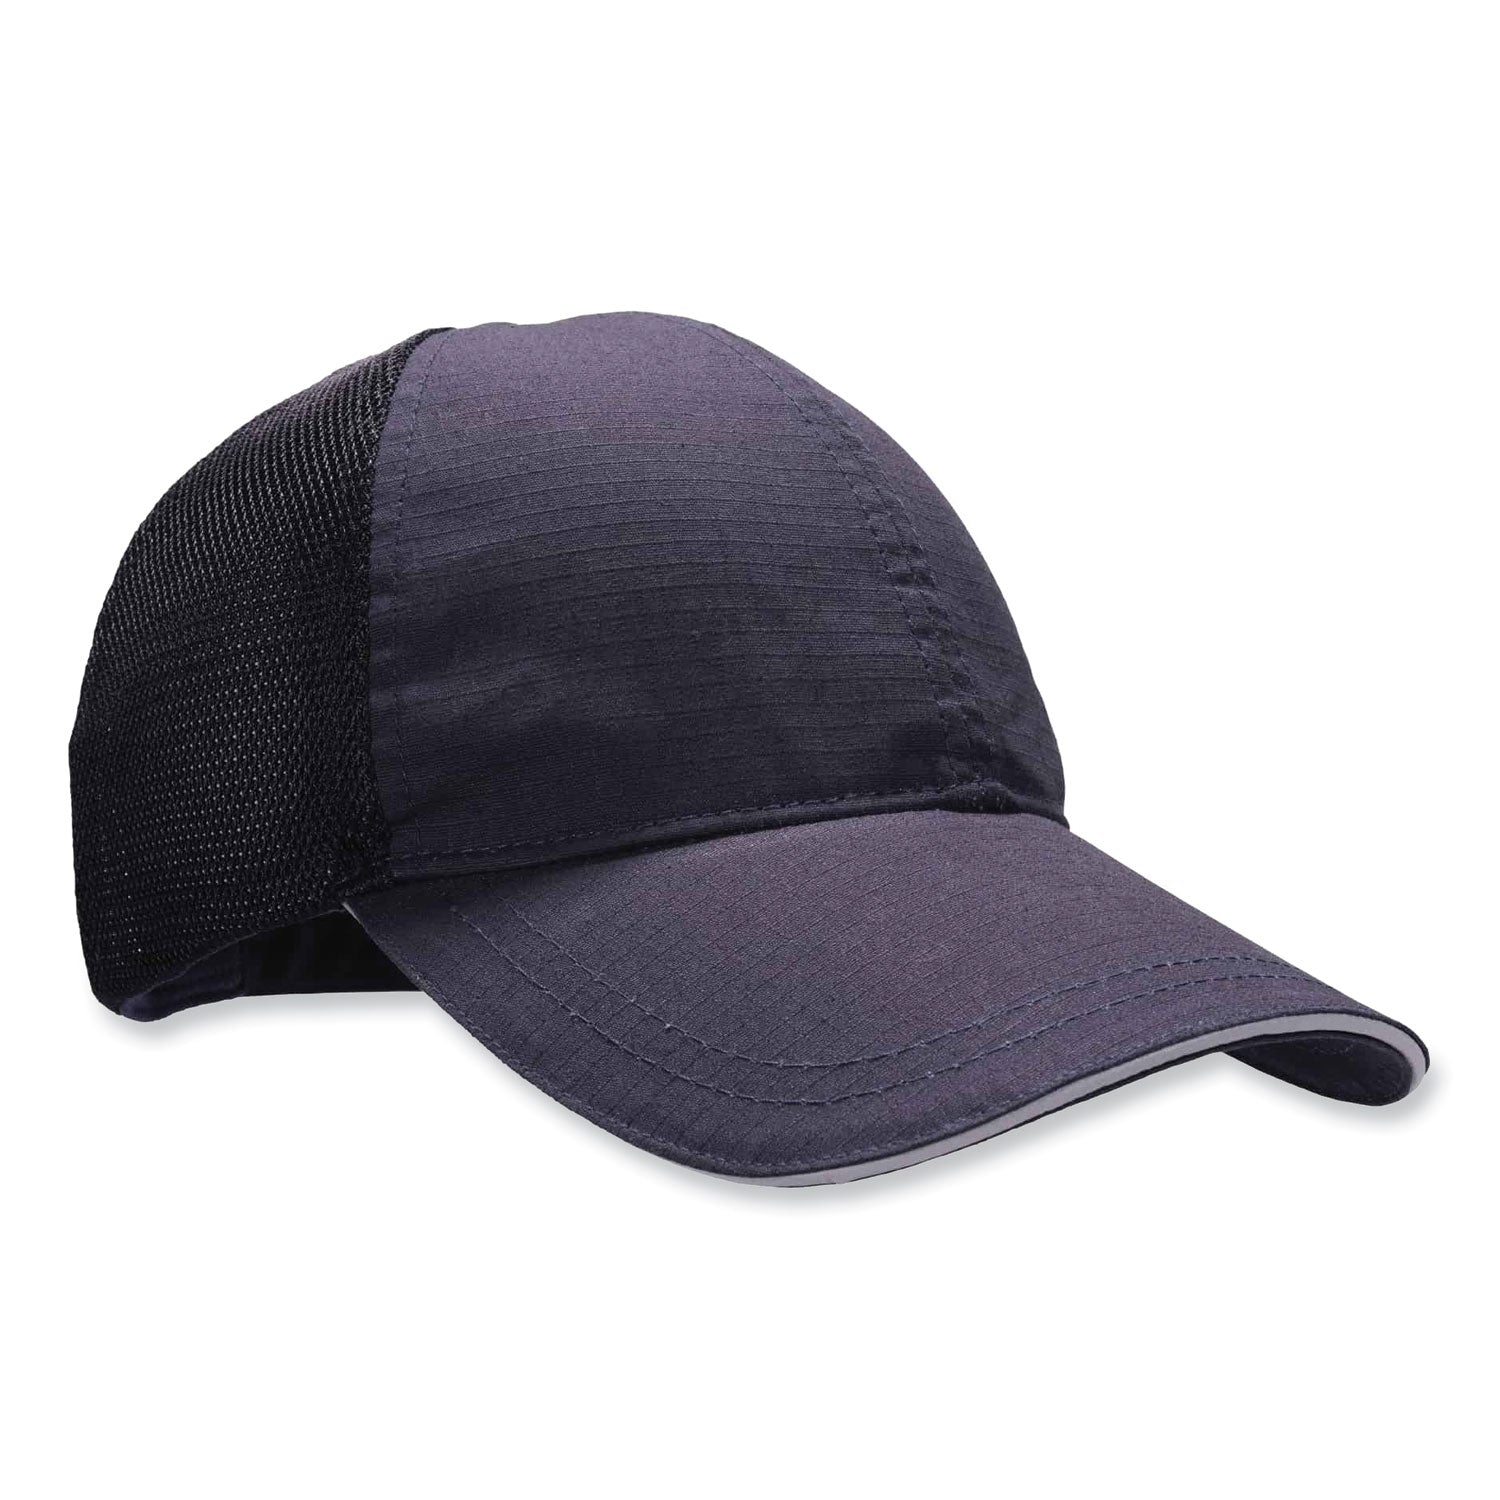 skullerz-8946-baseball-cap-cotton-polyester-one-size-fits-most-navy-ships-in-1-3-business-days_ego23401 - 1